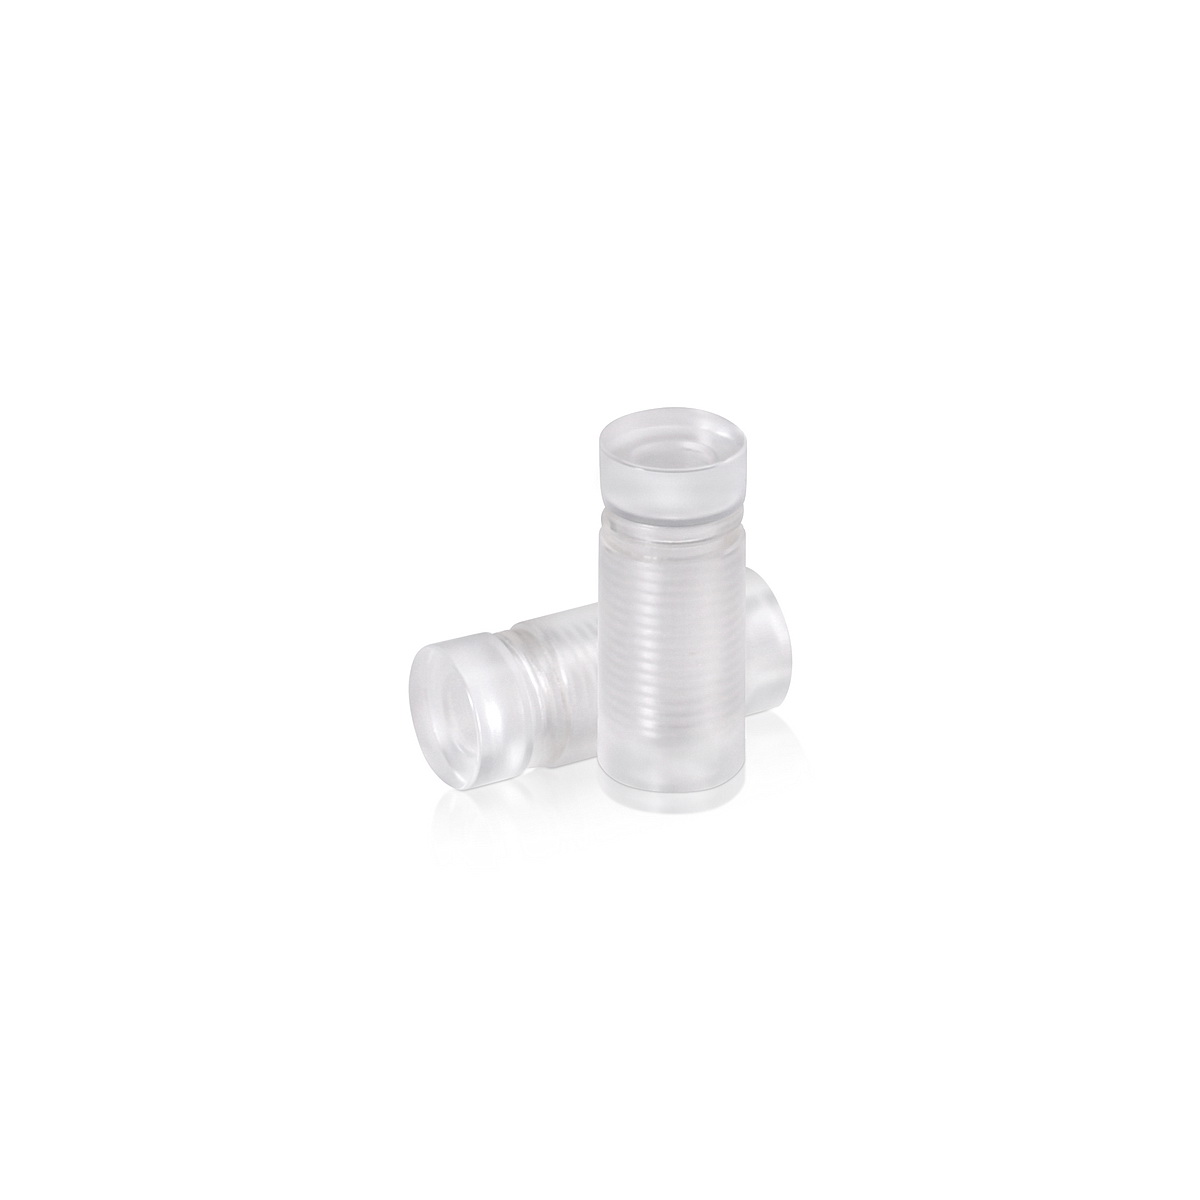 5/8'' Diameter X 1-3/4'' Barrel Length, Clear Acrylic Standoff. Easy Fasten Standoff (For Inside Use Only) Tamper Proof [Required Material Hole Size: 3/8'']